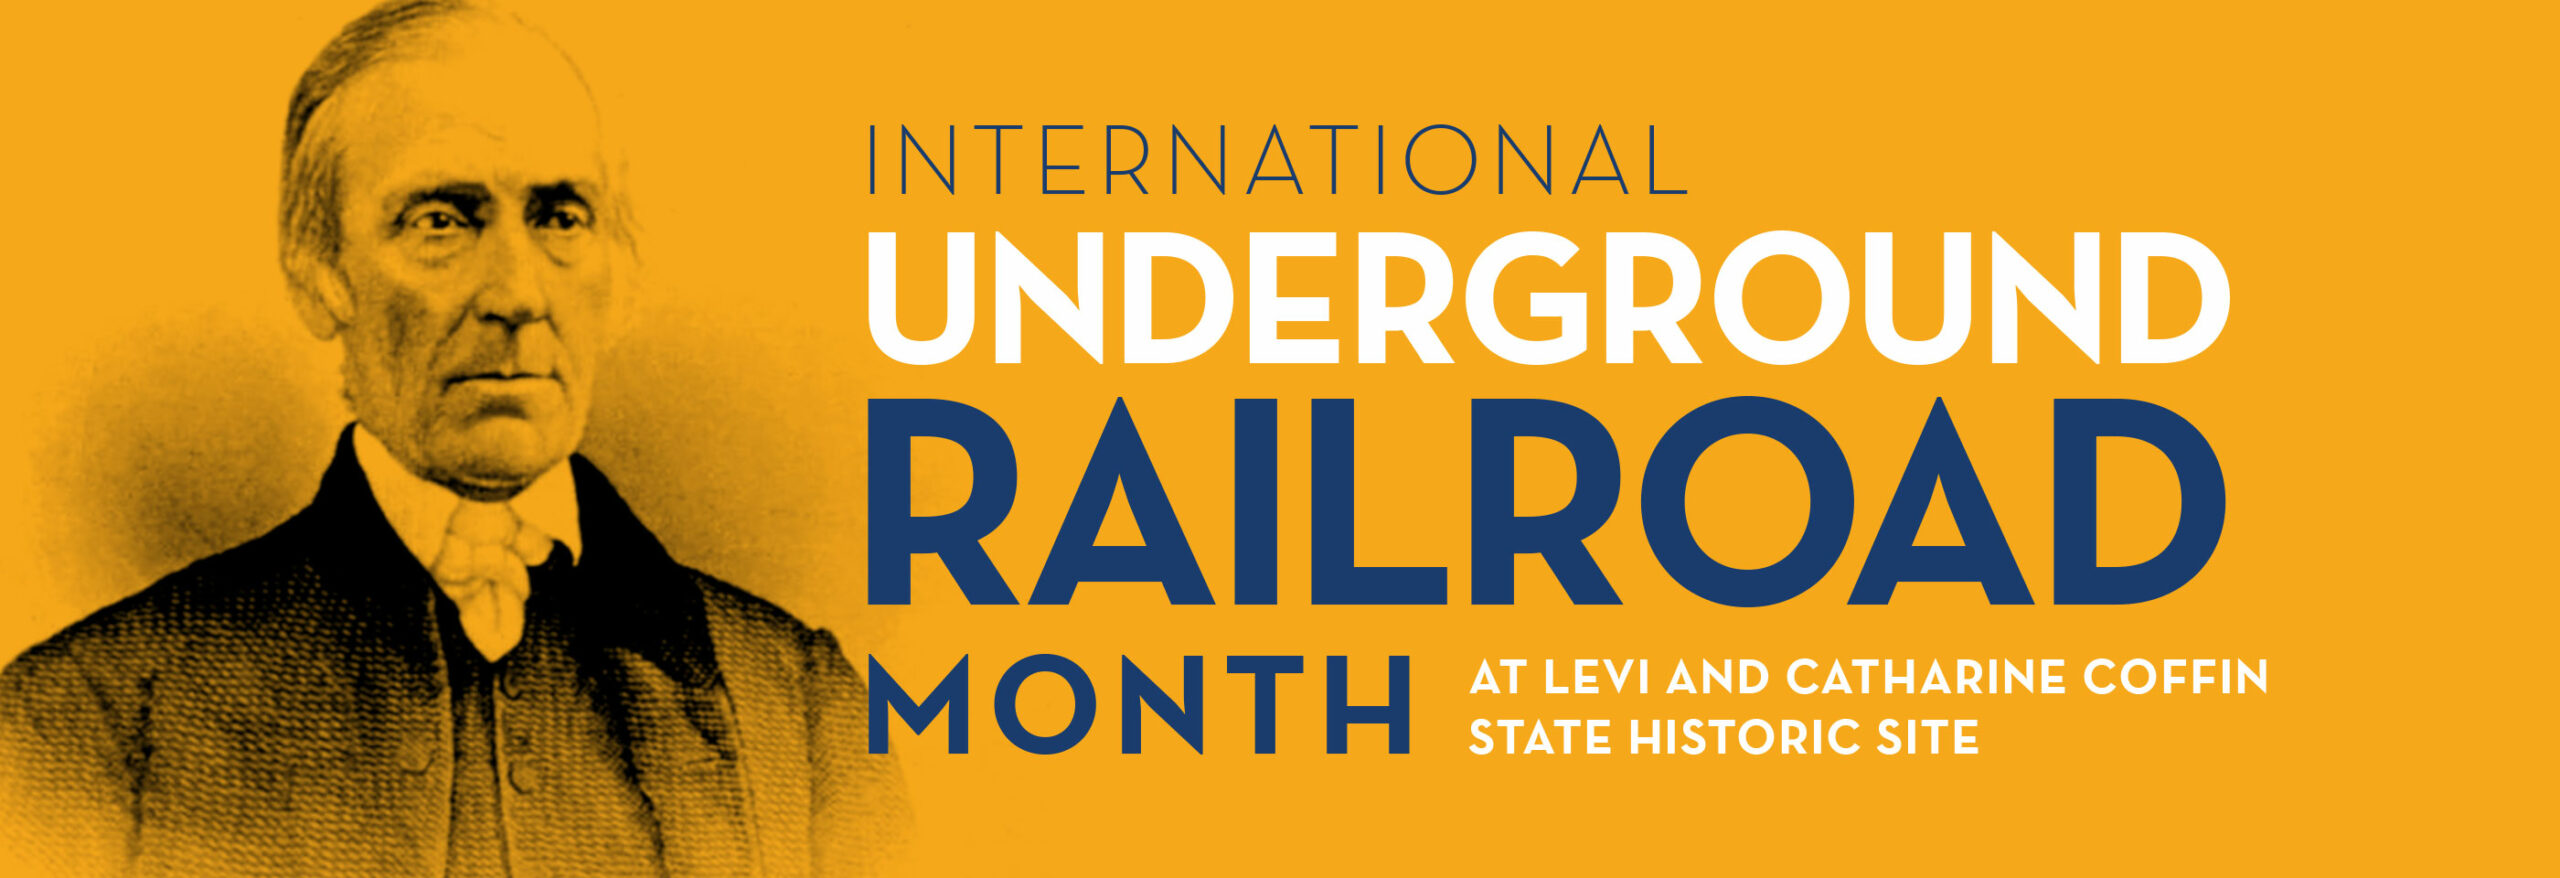 Underground Railroad Month at Levi and Catharine Coffin